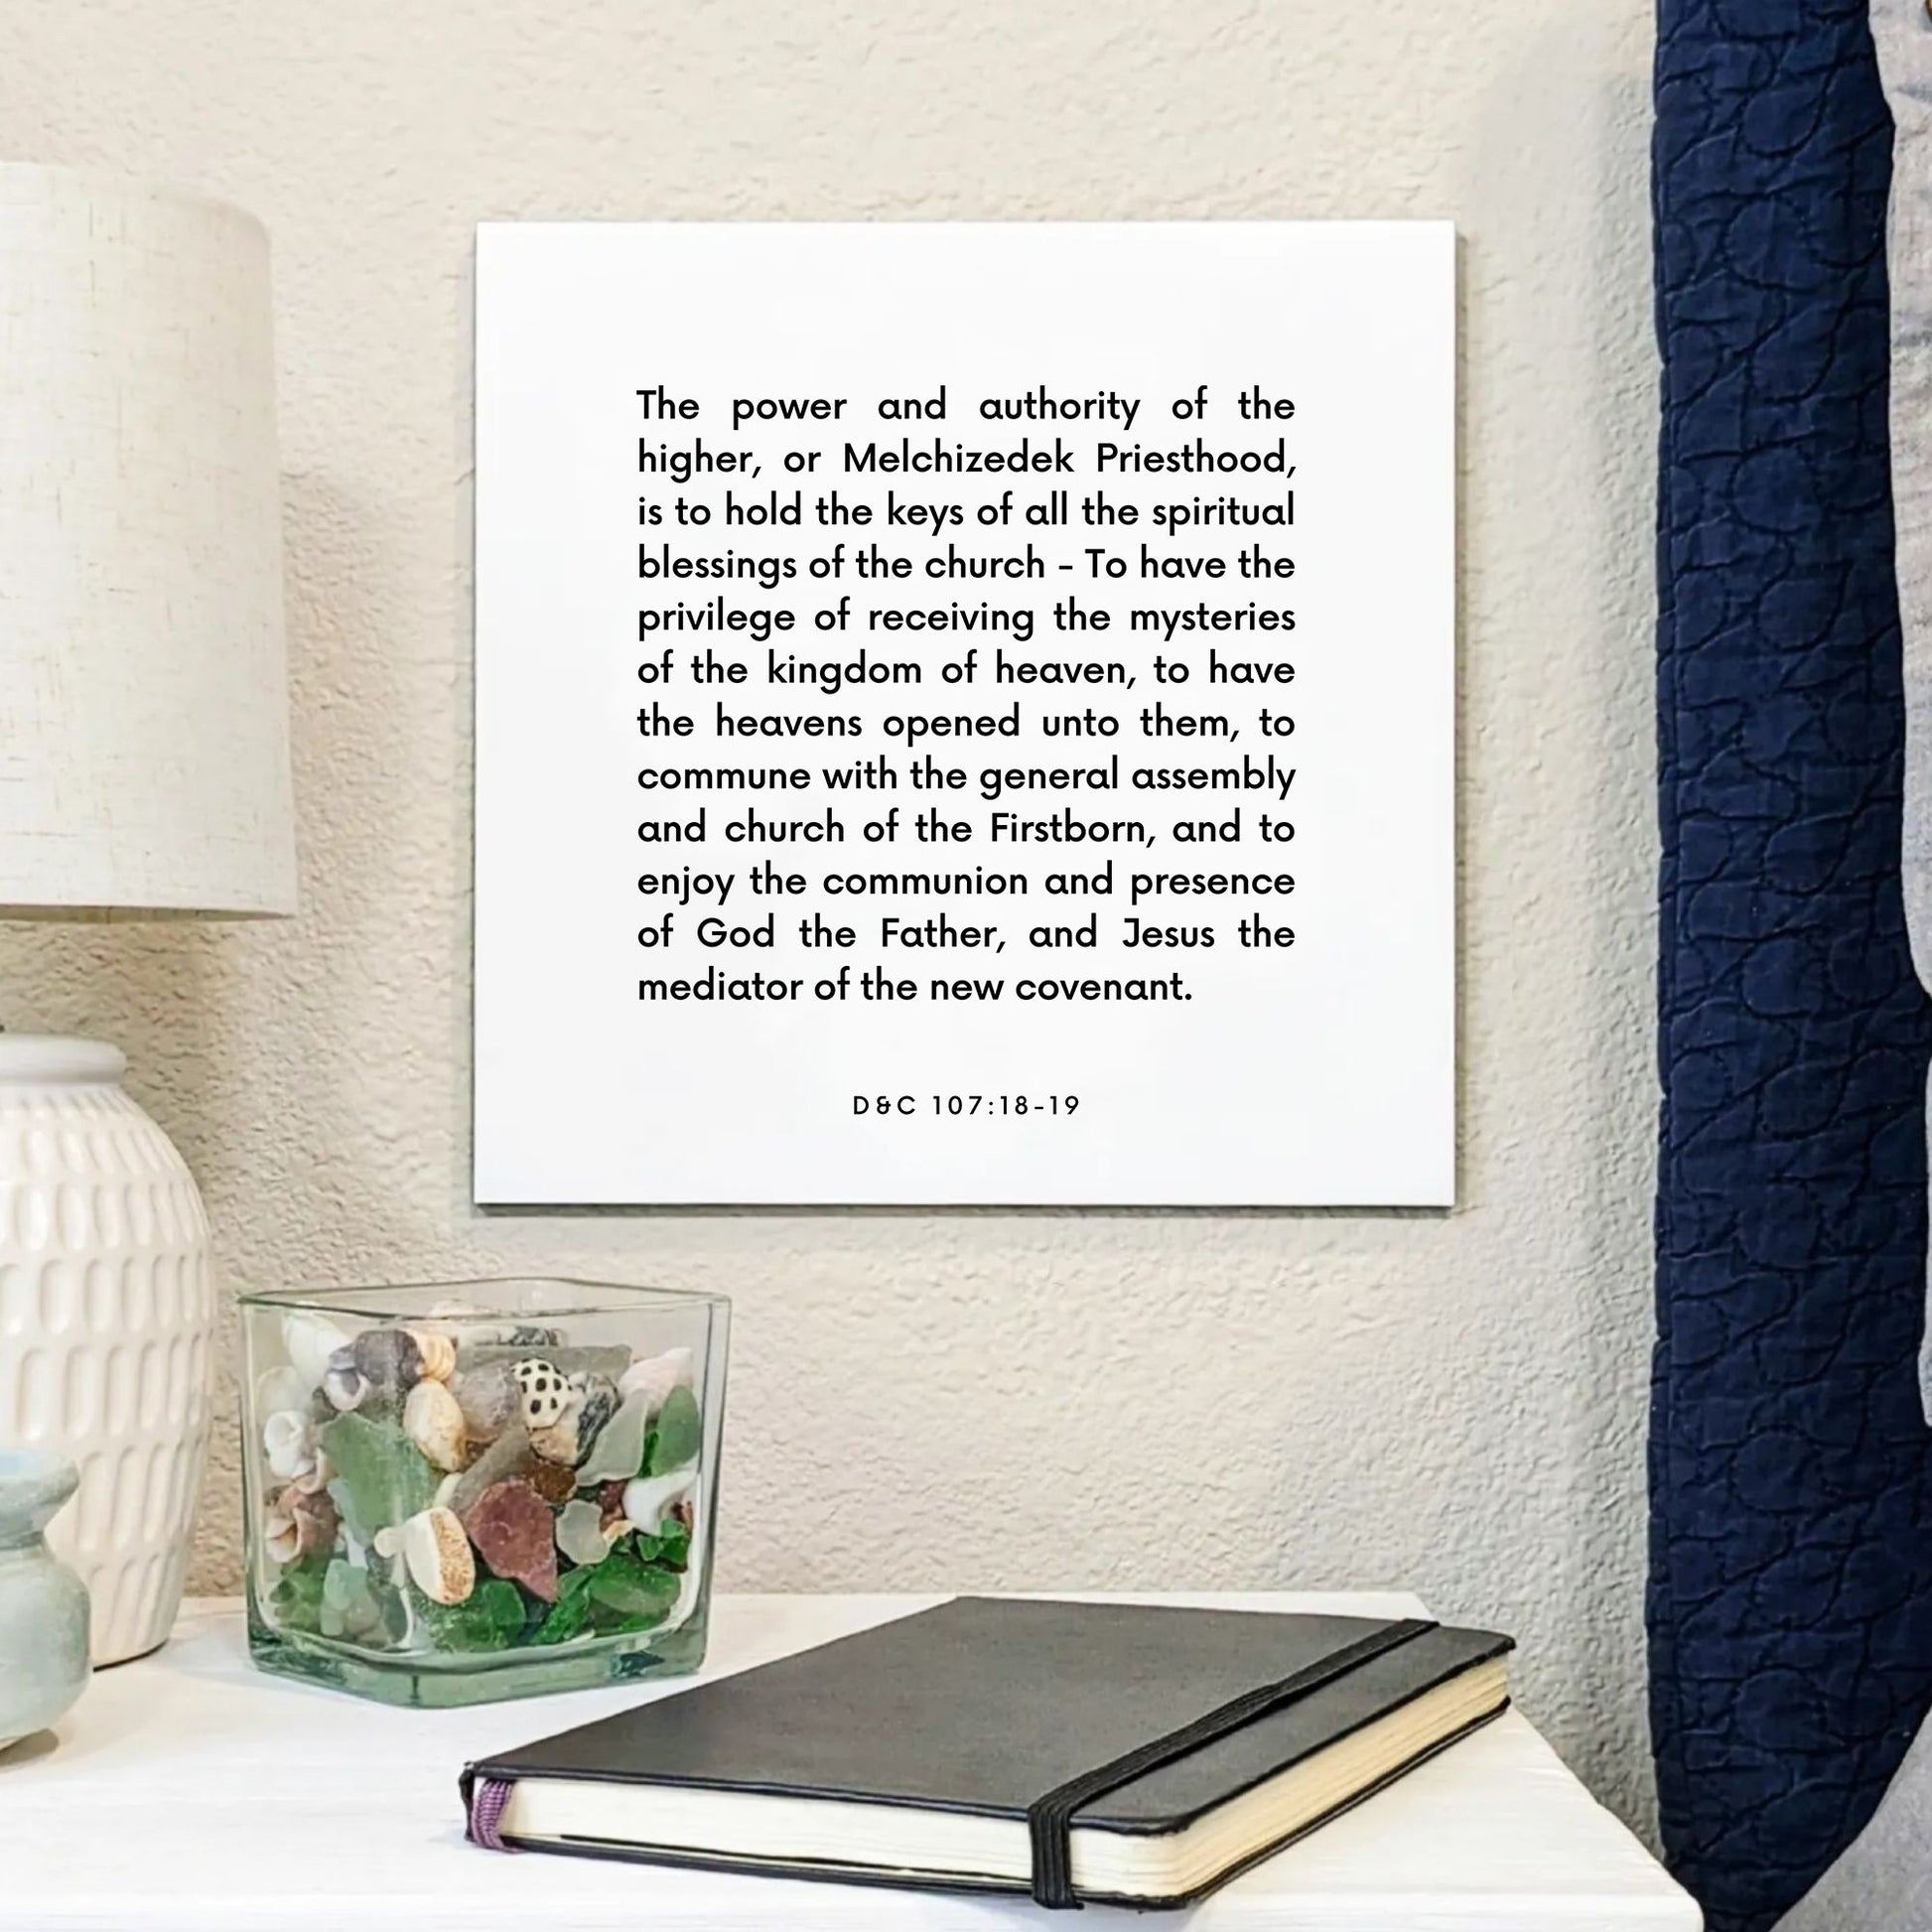 Bedside mouting of the scripture tile for D&C 107:18-19 - "The keys of all the spiritual blessings of the church"